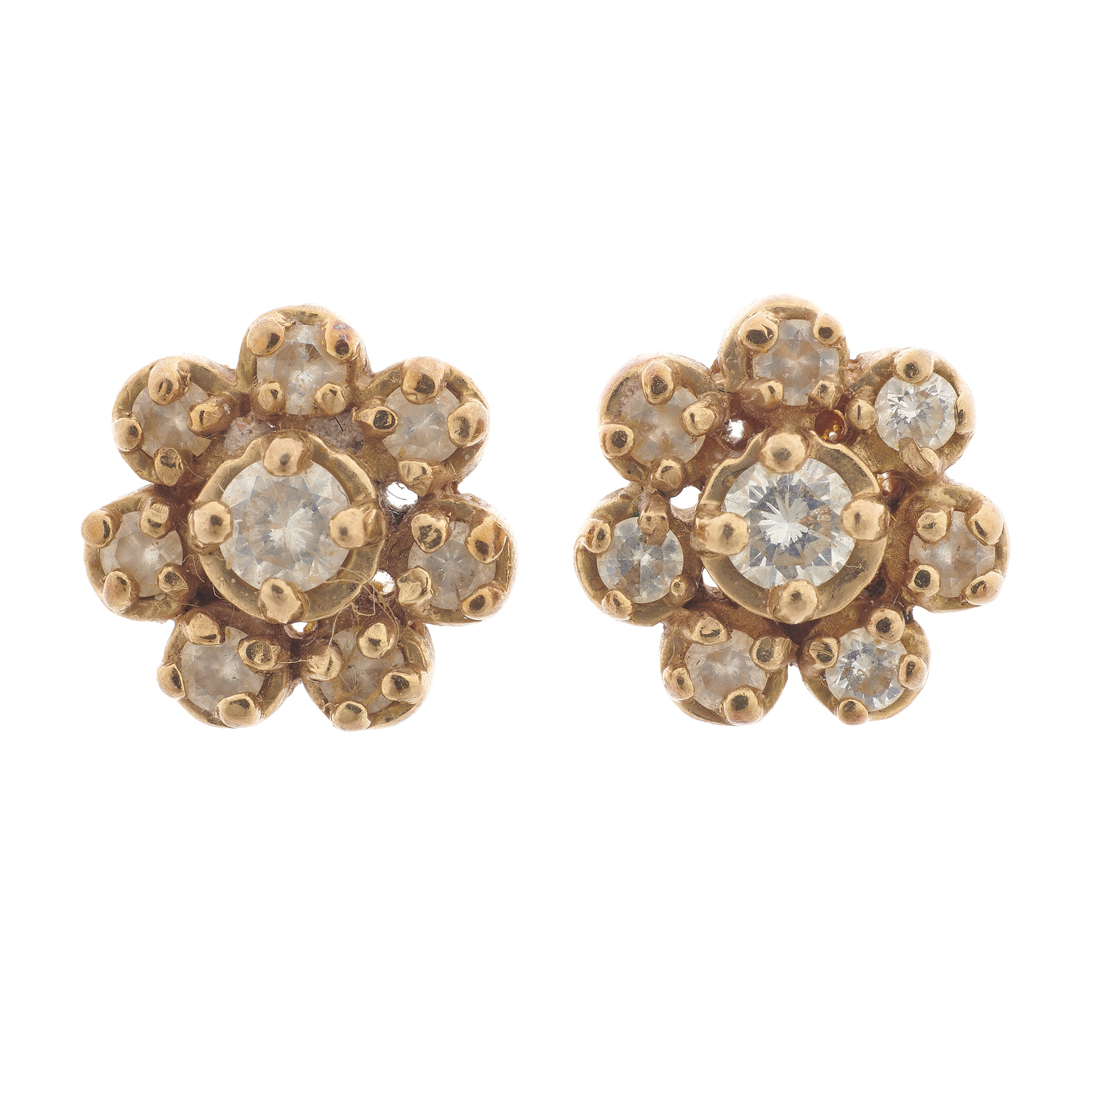 A PAIR OF DIAMOND AND 14K GOLD 3ce22e